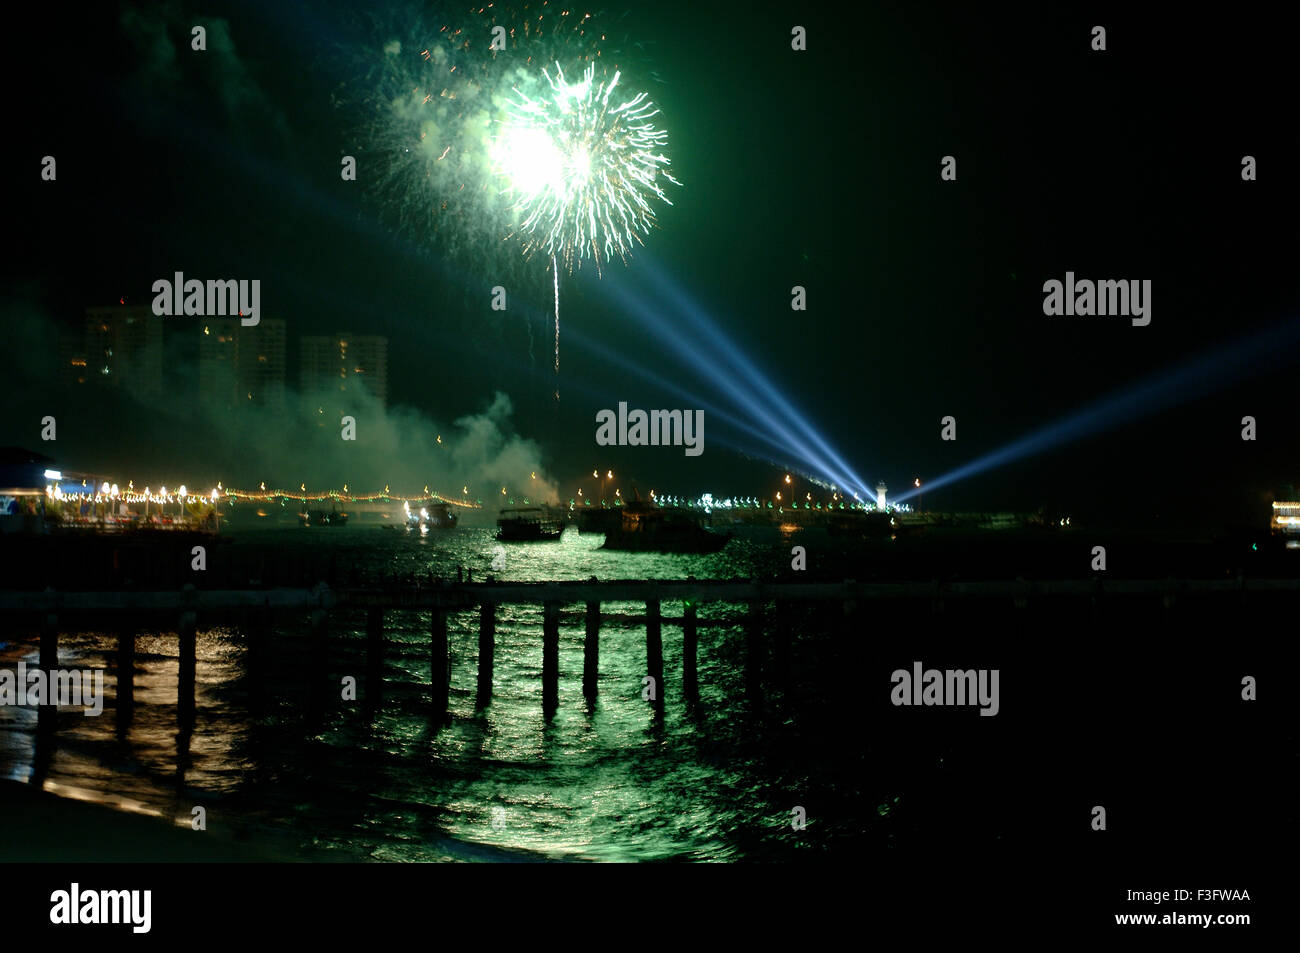 Fire Works Celebrating Chinese New Year 2004 ; Pattaya Thailand ; South East Asia Stock Photo